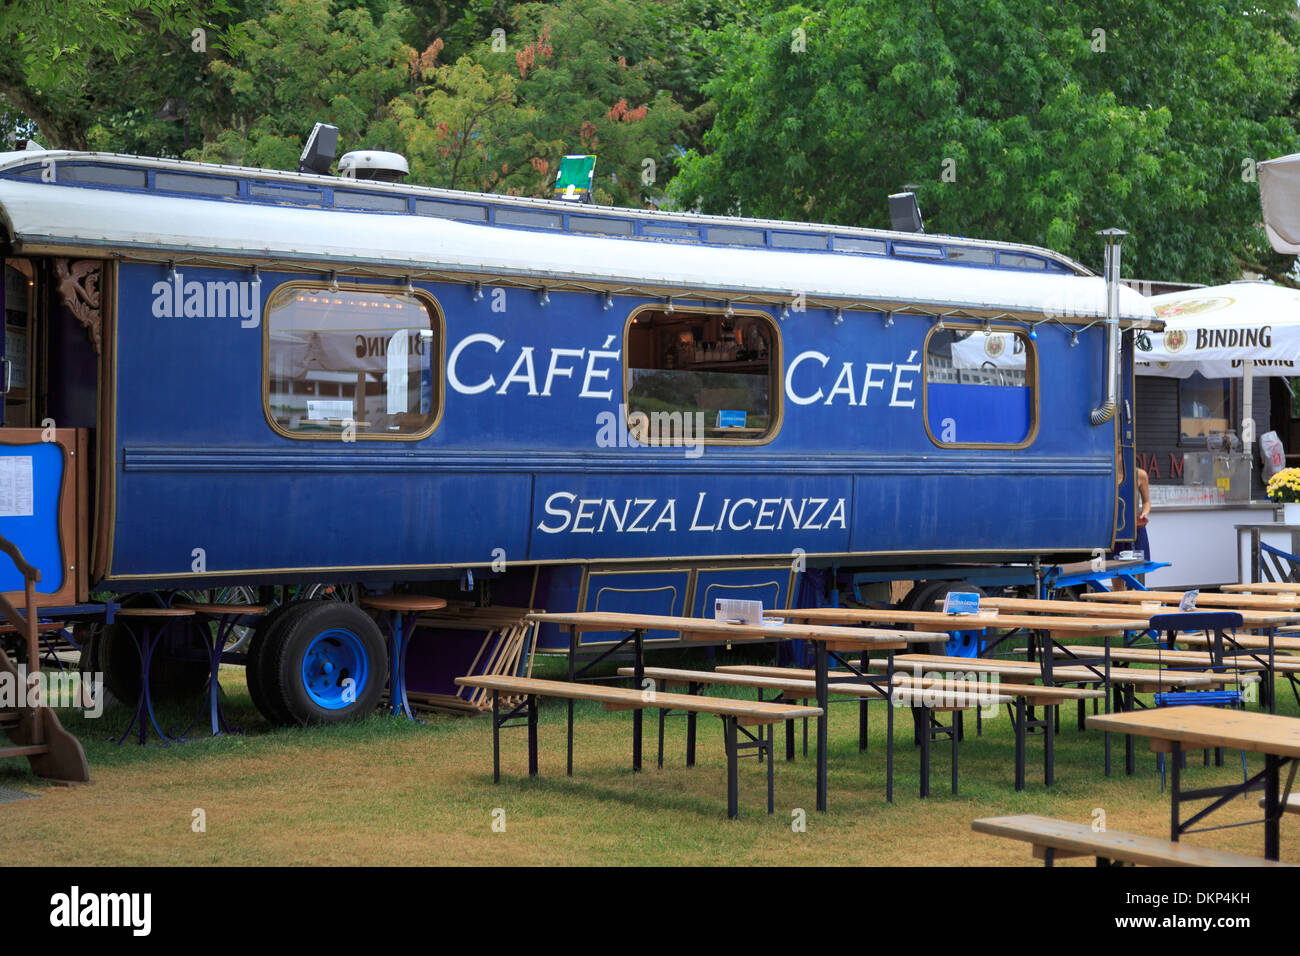 Rail carriage converted into a restaurant and parked in a garden with benches, Frankfurt, Germany Stock Photo